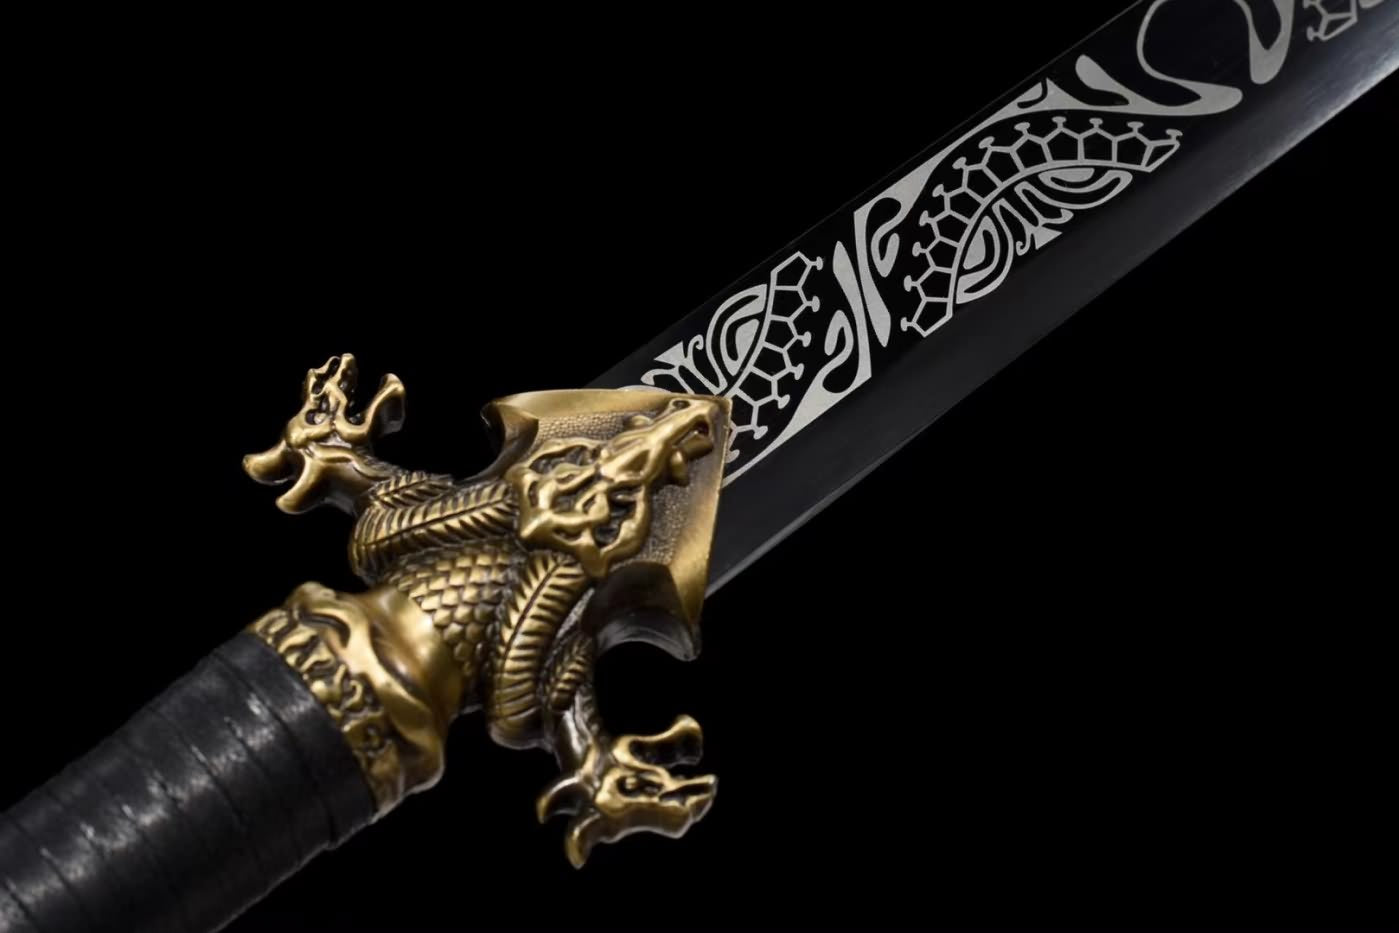 Dragon dao Sword Real,High Carbon Steel Black Blade,Alloy Fittings,LOONGSWORD